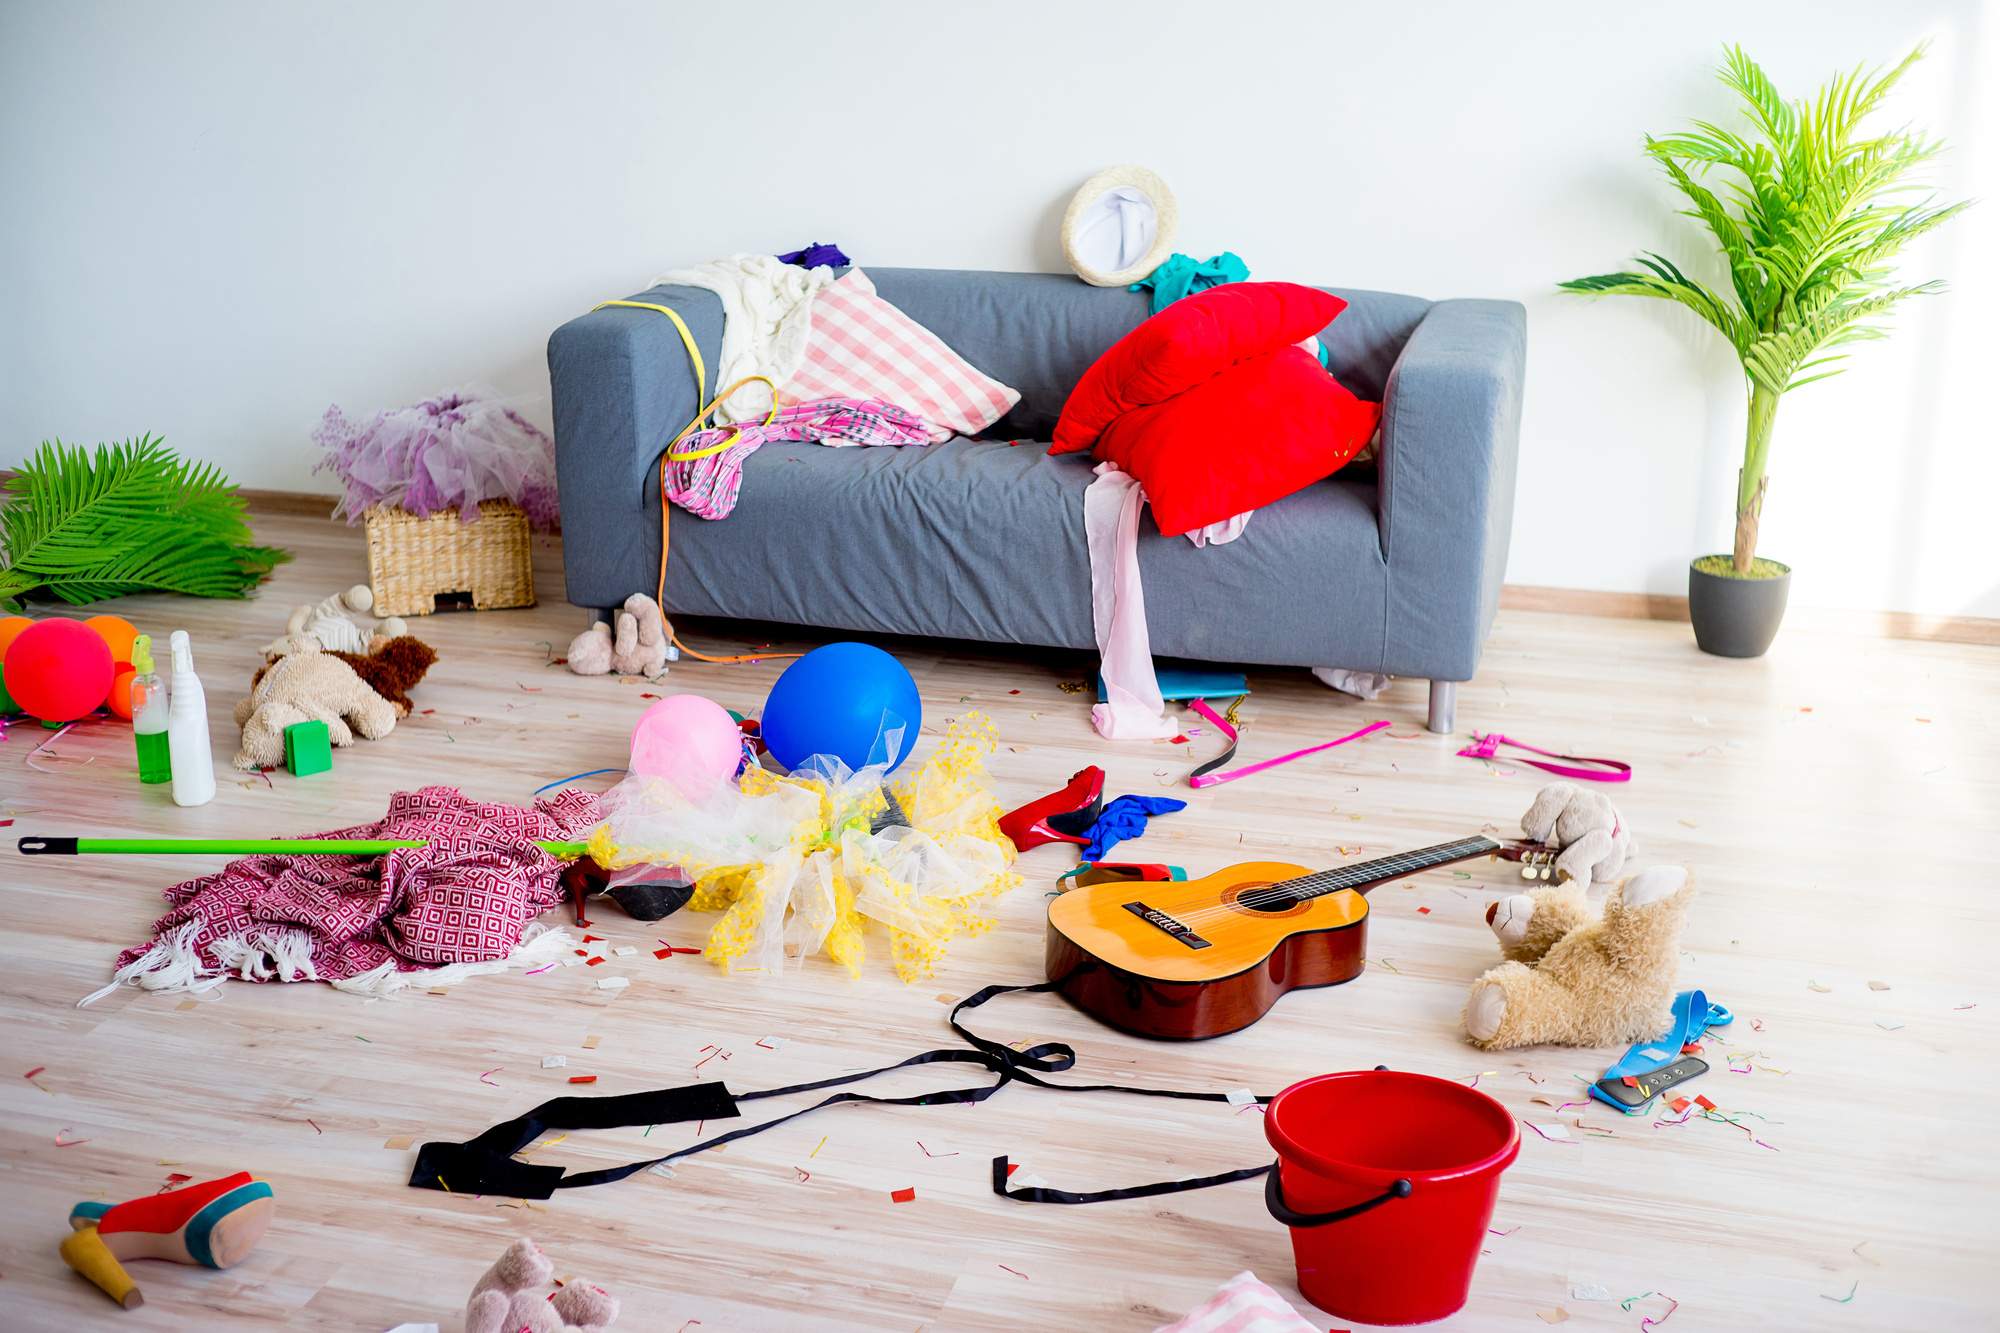 How to Get Rid of Clutter in Your Home: 4 Easy Tips